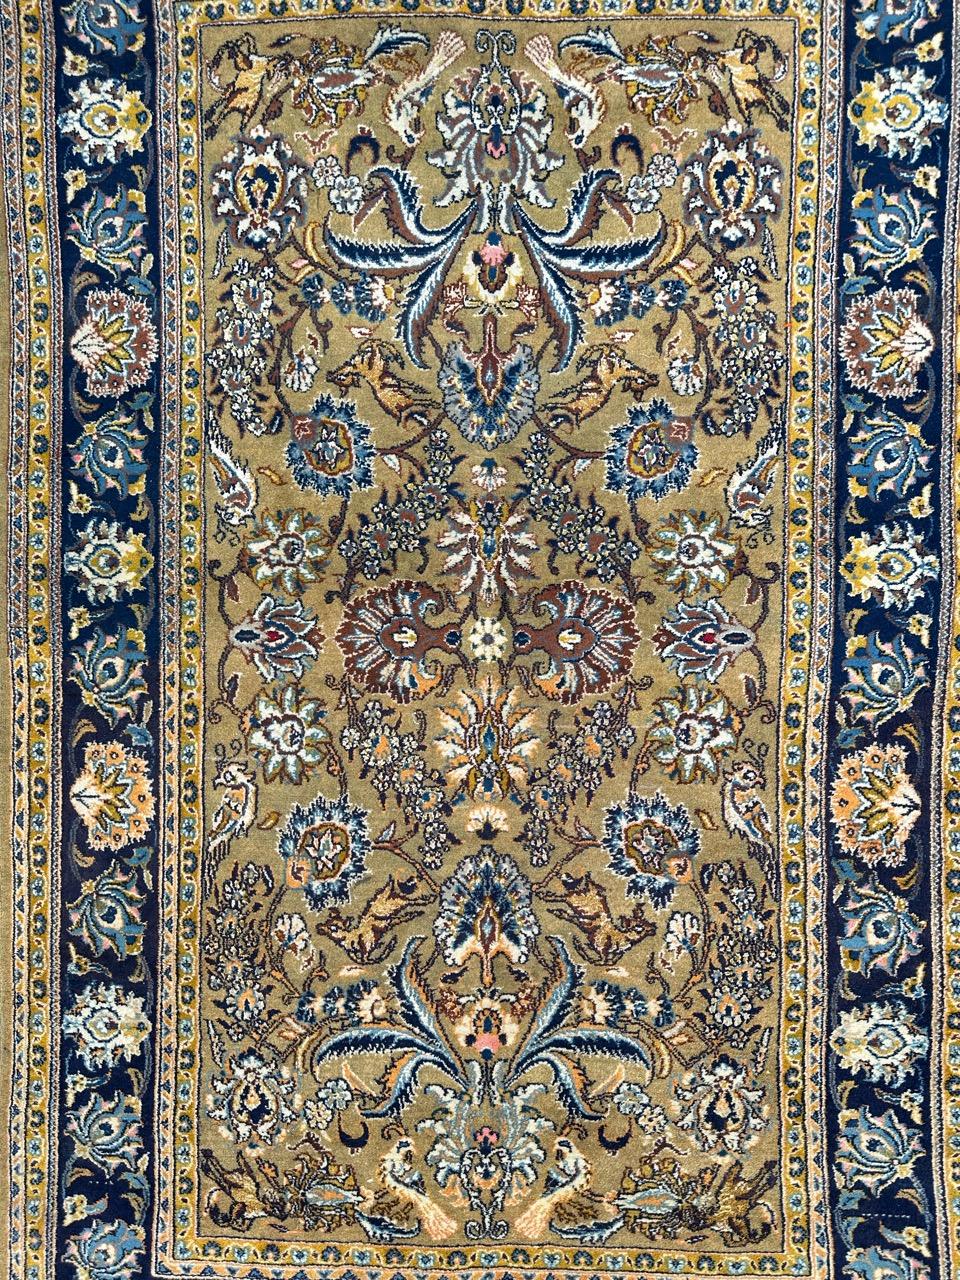 A mid 20th-century masterpiece – a Kashan rug, meticulously handwoven with a blend of wool and delicate silk accents on a sturdy cotton foundation. This elegant piece boasts stylized floral motifs and a rich natural color palette. The mustard yellow